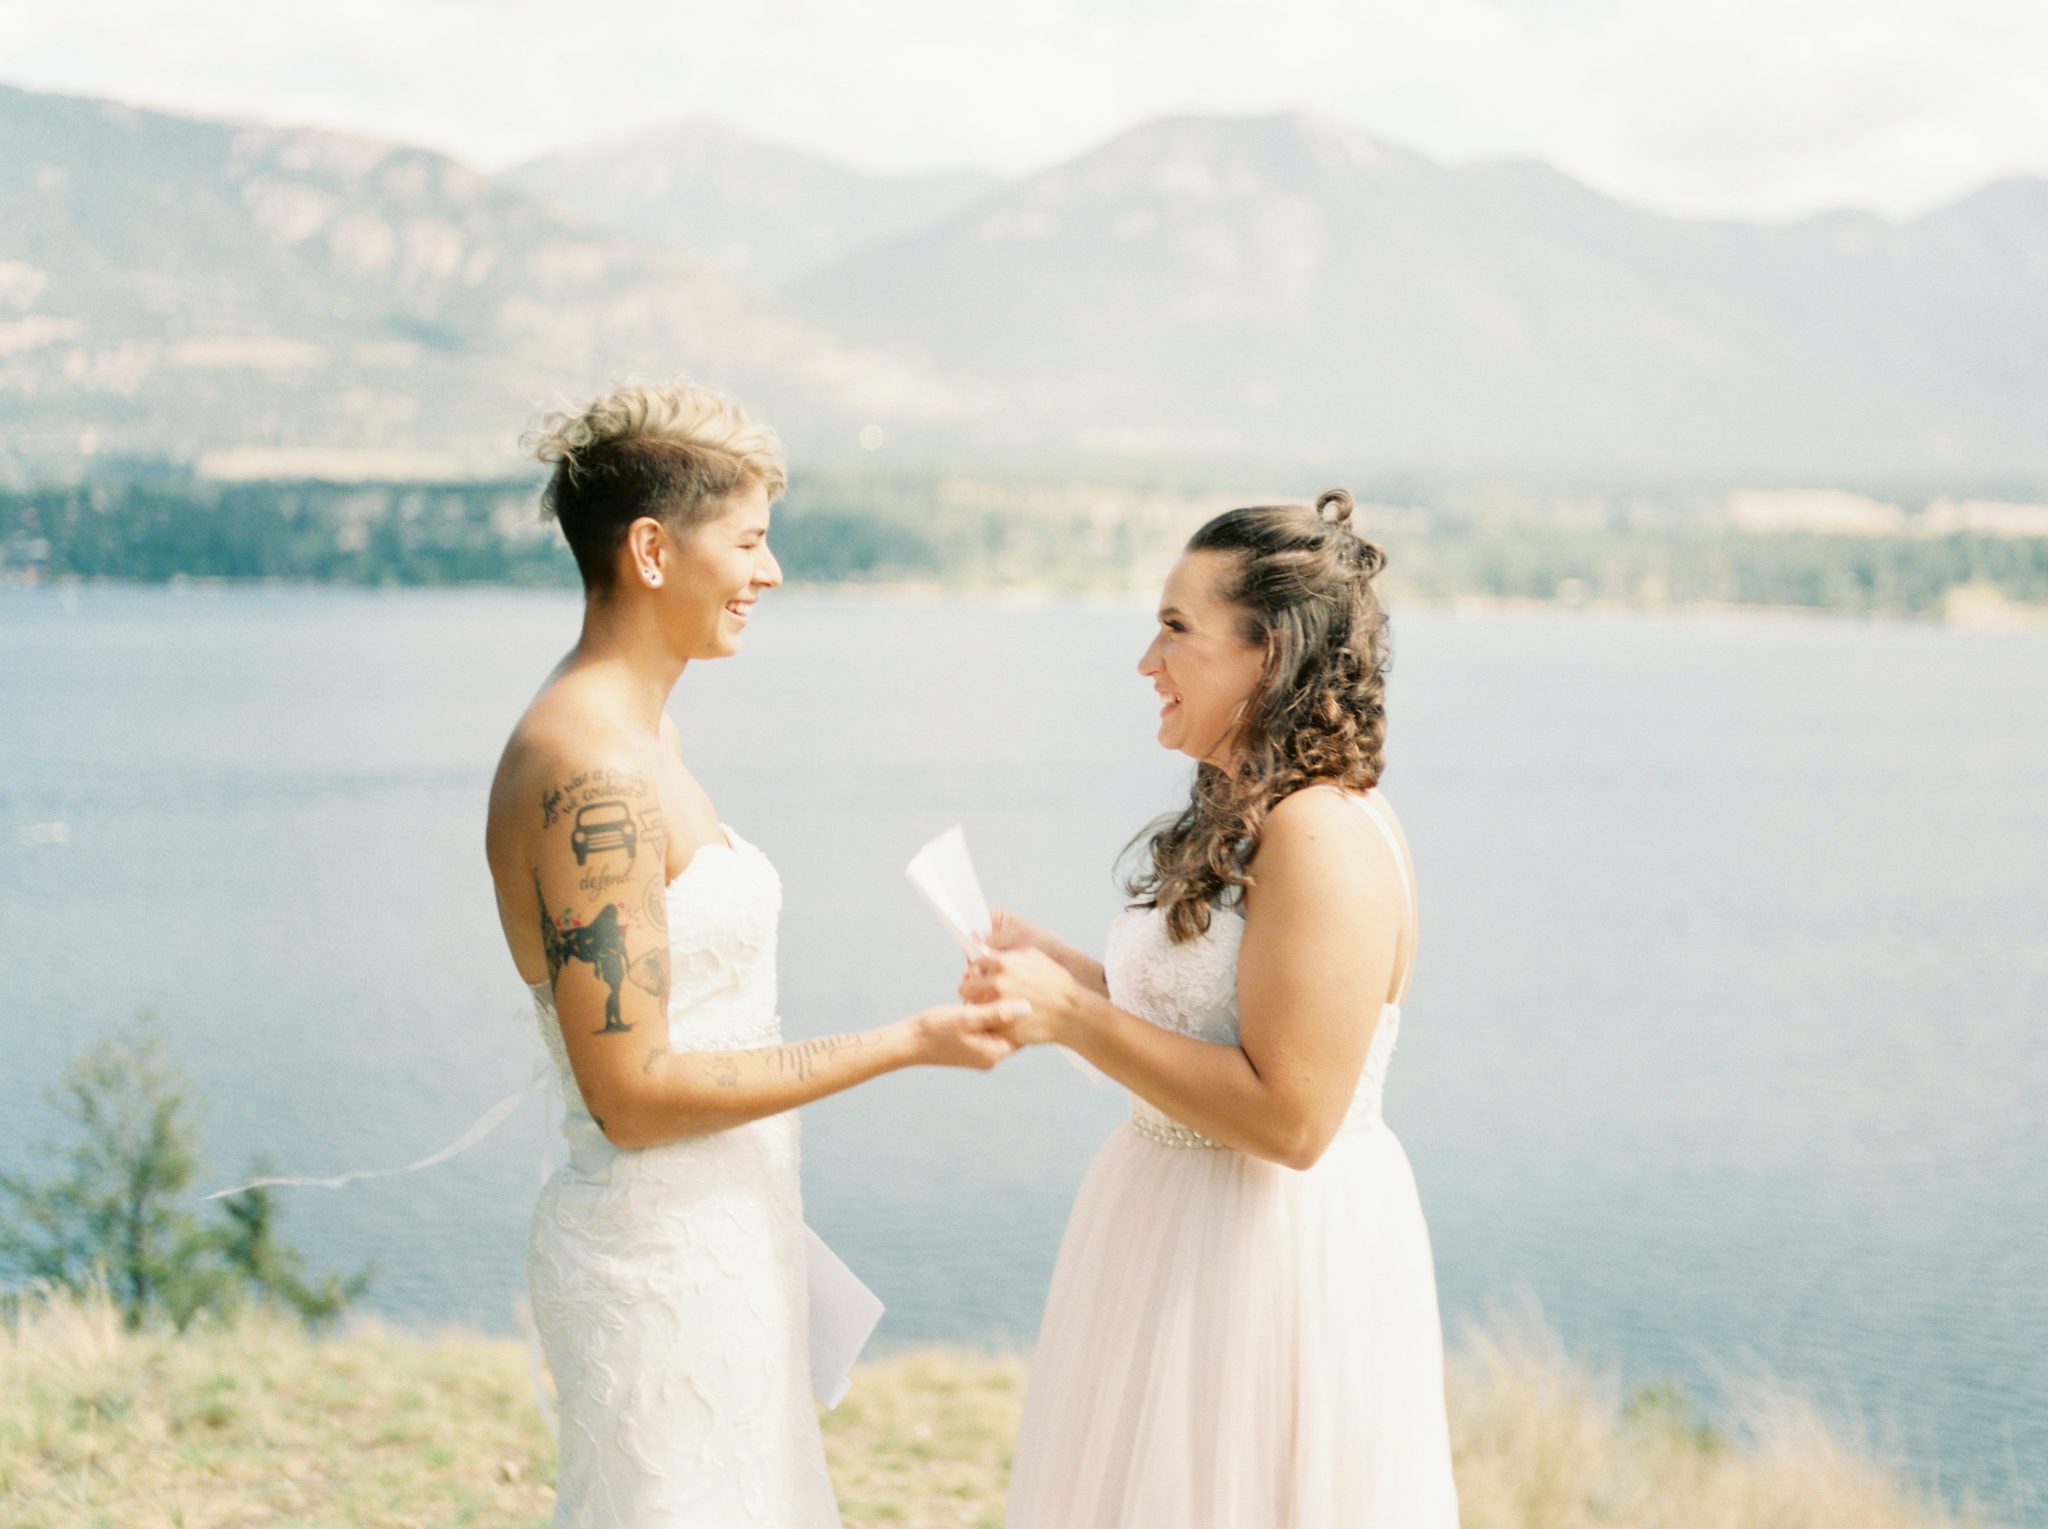 Brides share their vows with each other beside at an Invermere wedding ceremony